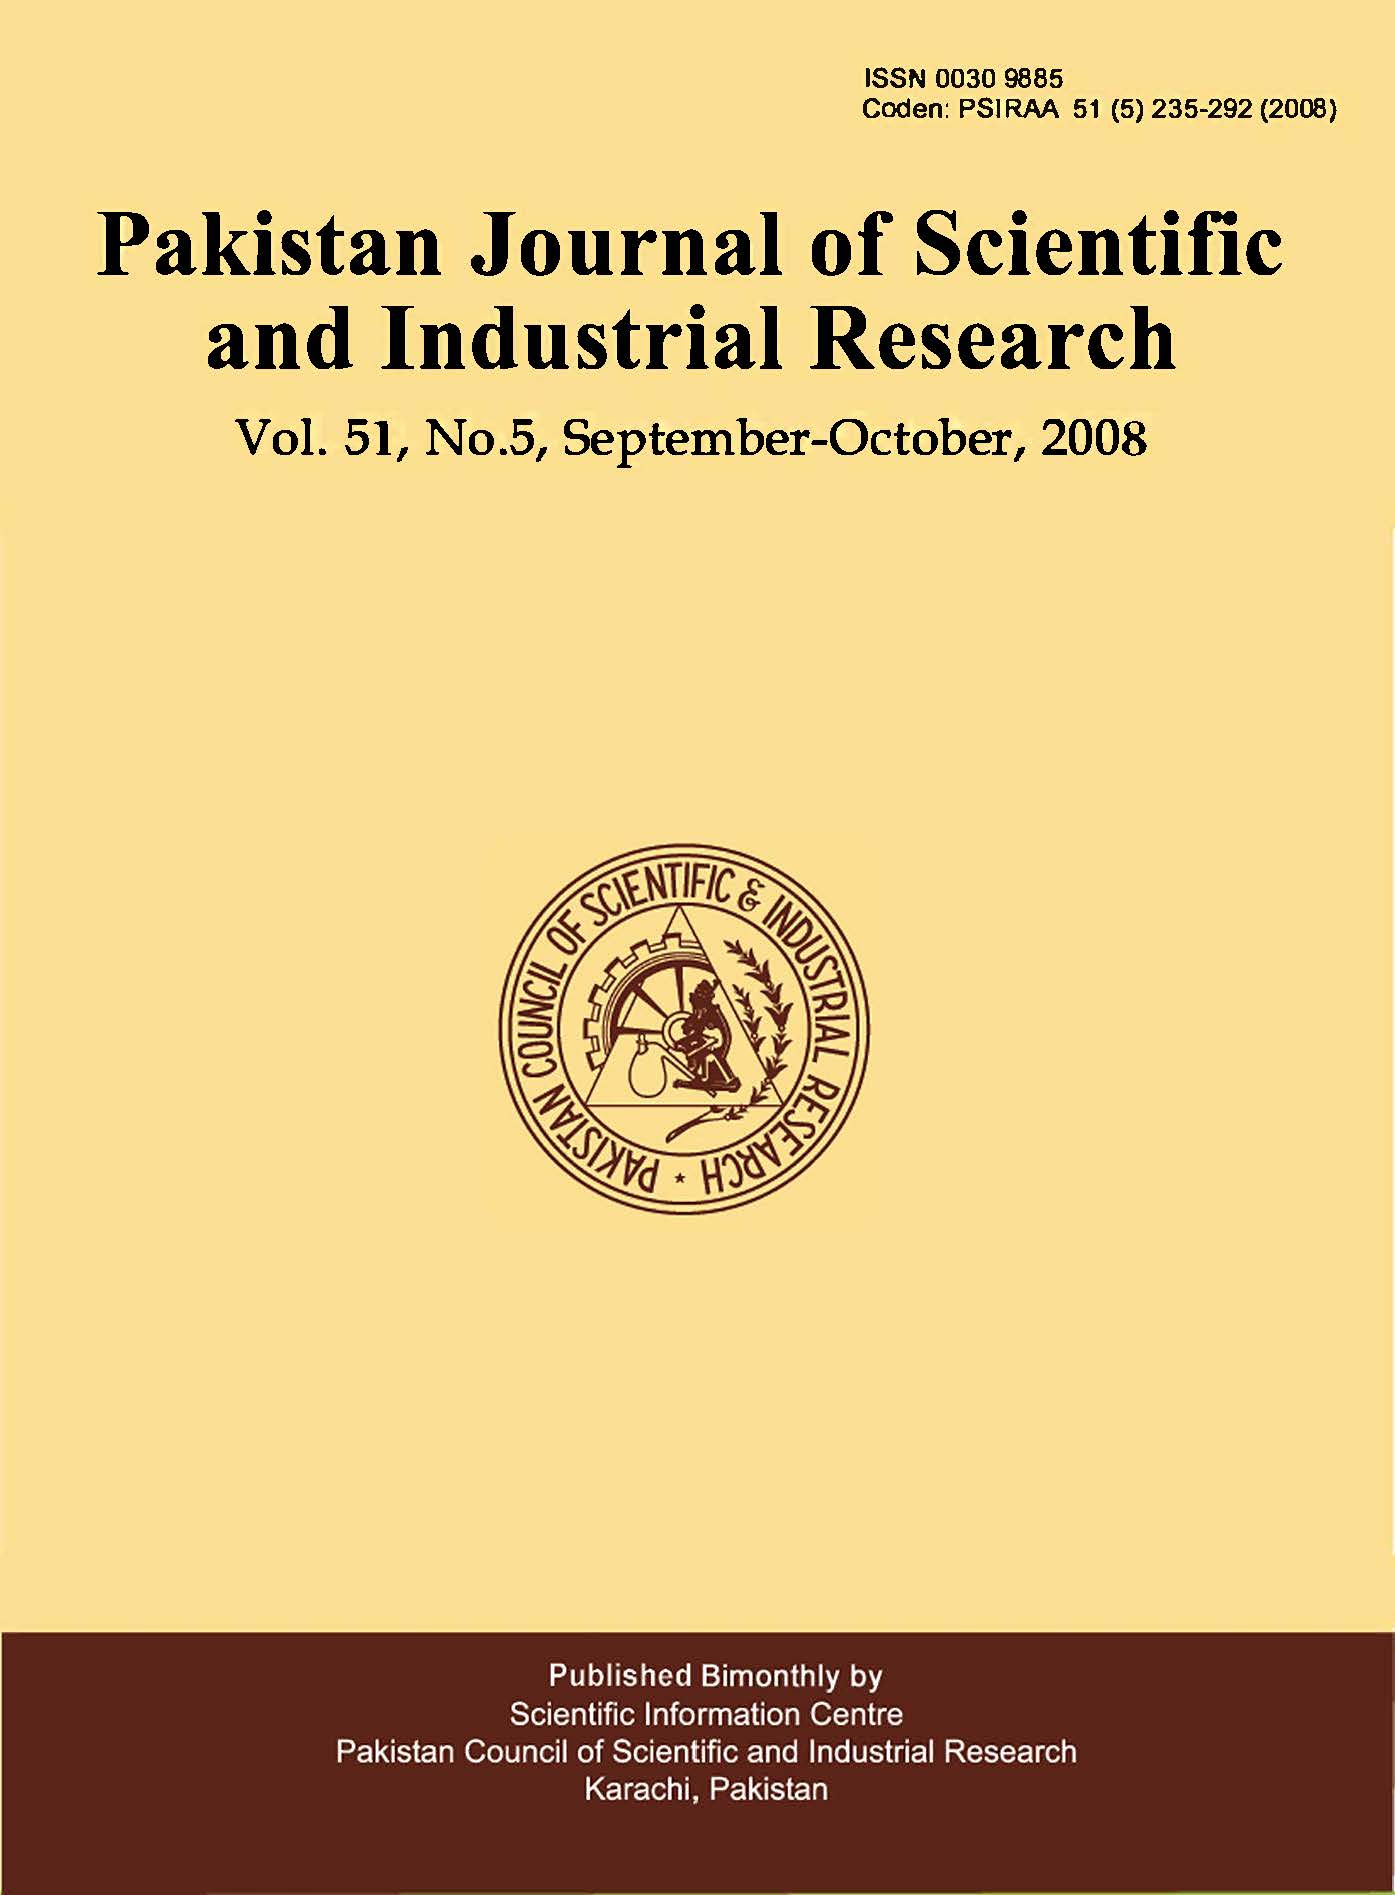 					View Vol. 51 No. 5 (2008): Pakistan Journal of Scientific and Industrial Research
				